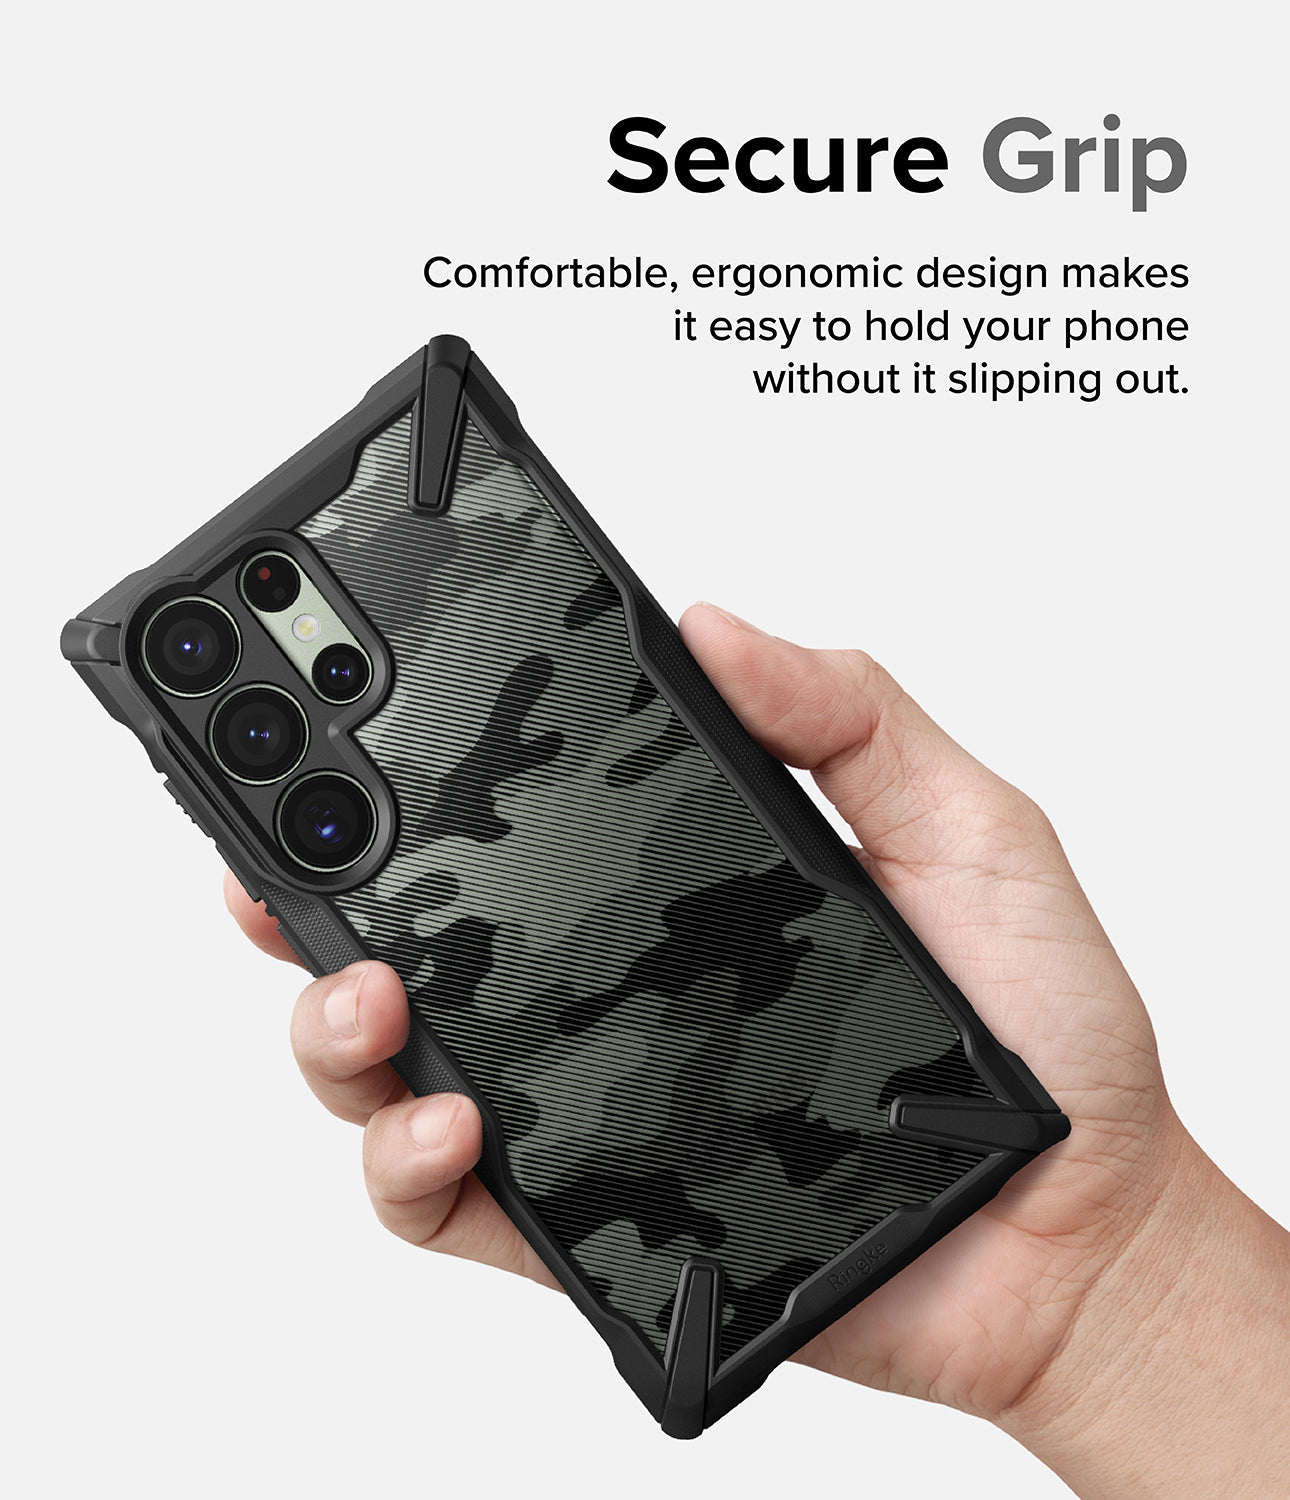 Galaxy S23 Ultra Case | Fusion-X - Camo Black - Secure Grip. Comfortable, ergonomic design makes it easy to hold your phone without it slipping out.